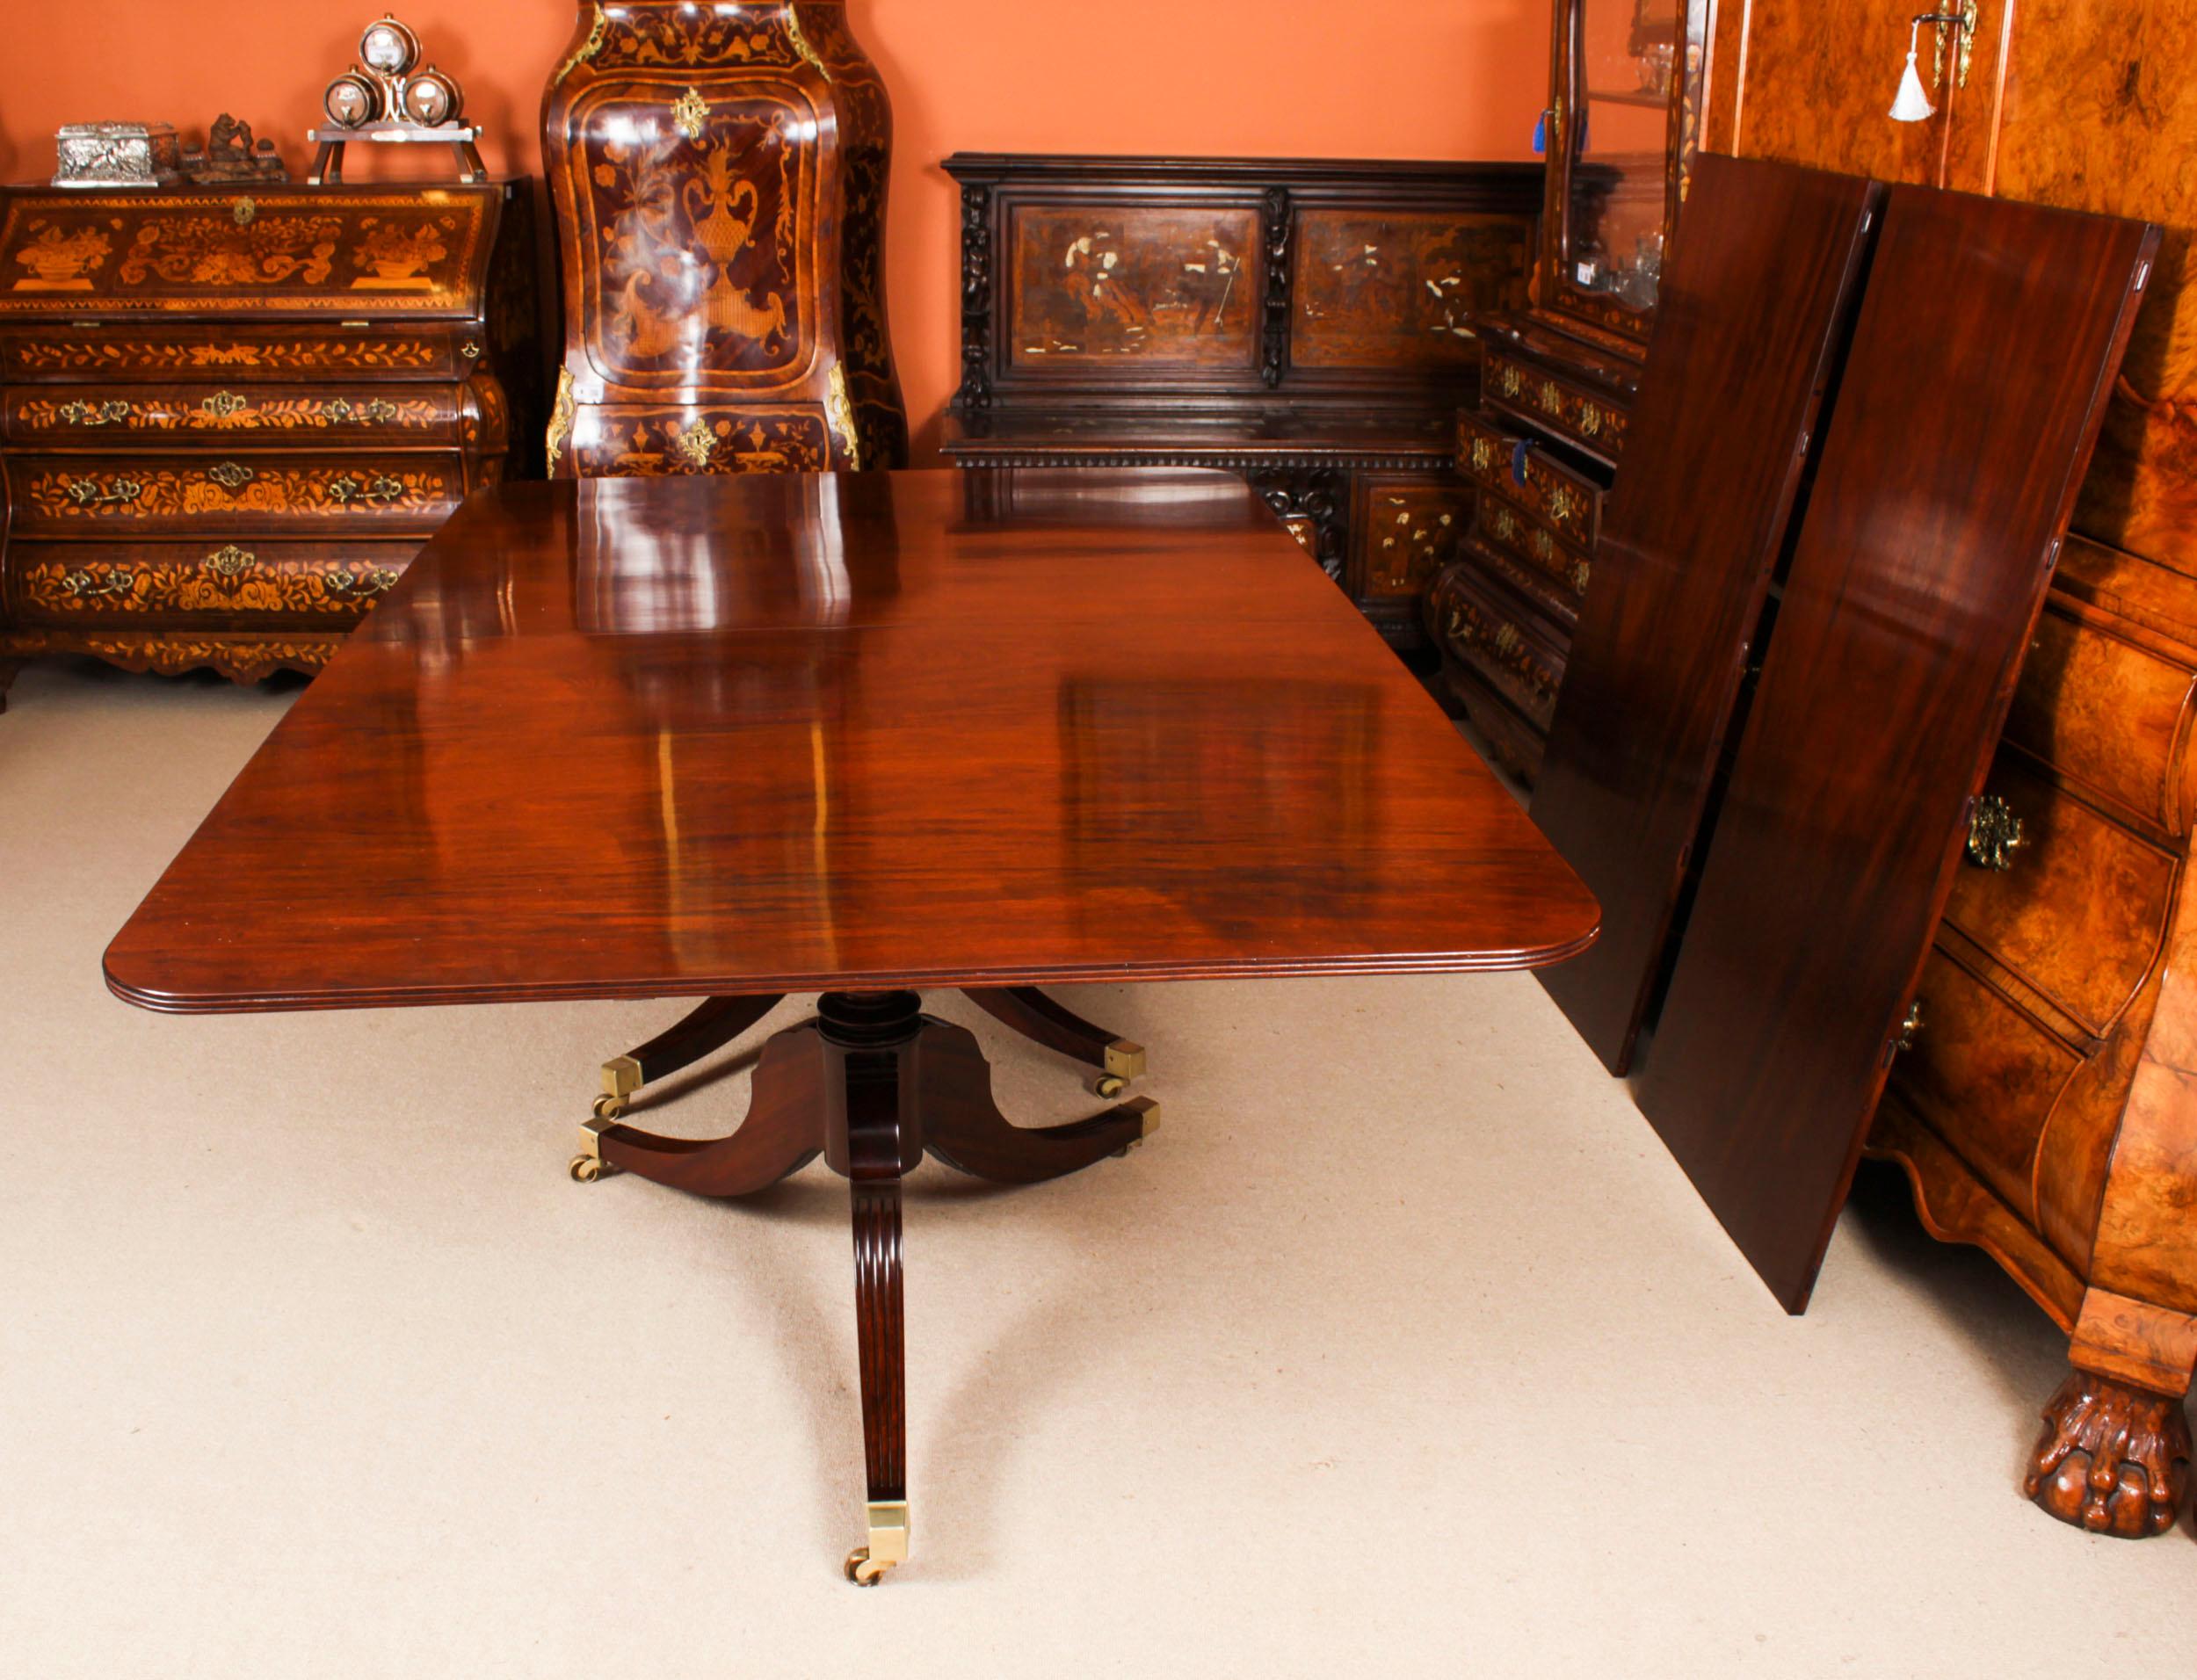 Antique 14ft Flame Mahogany Regency Revival Triple Pillar Dining Table 19th C For Sale 4